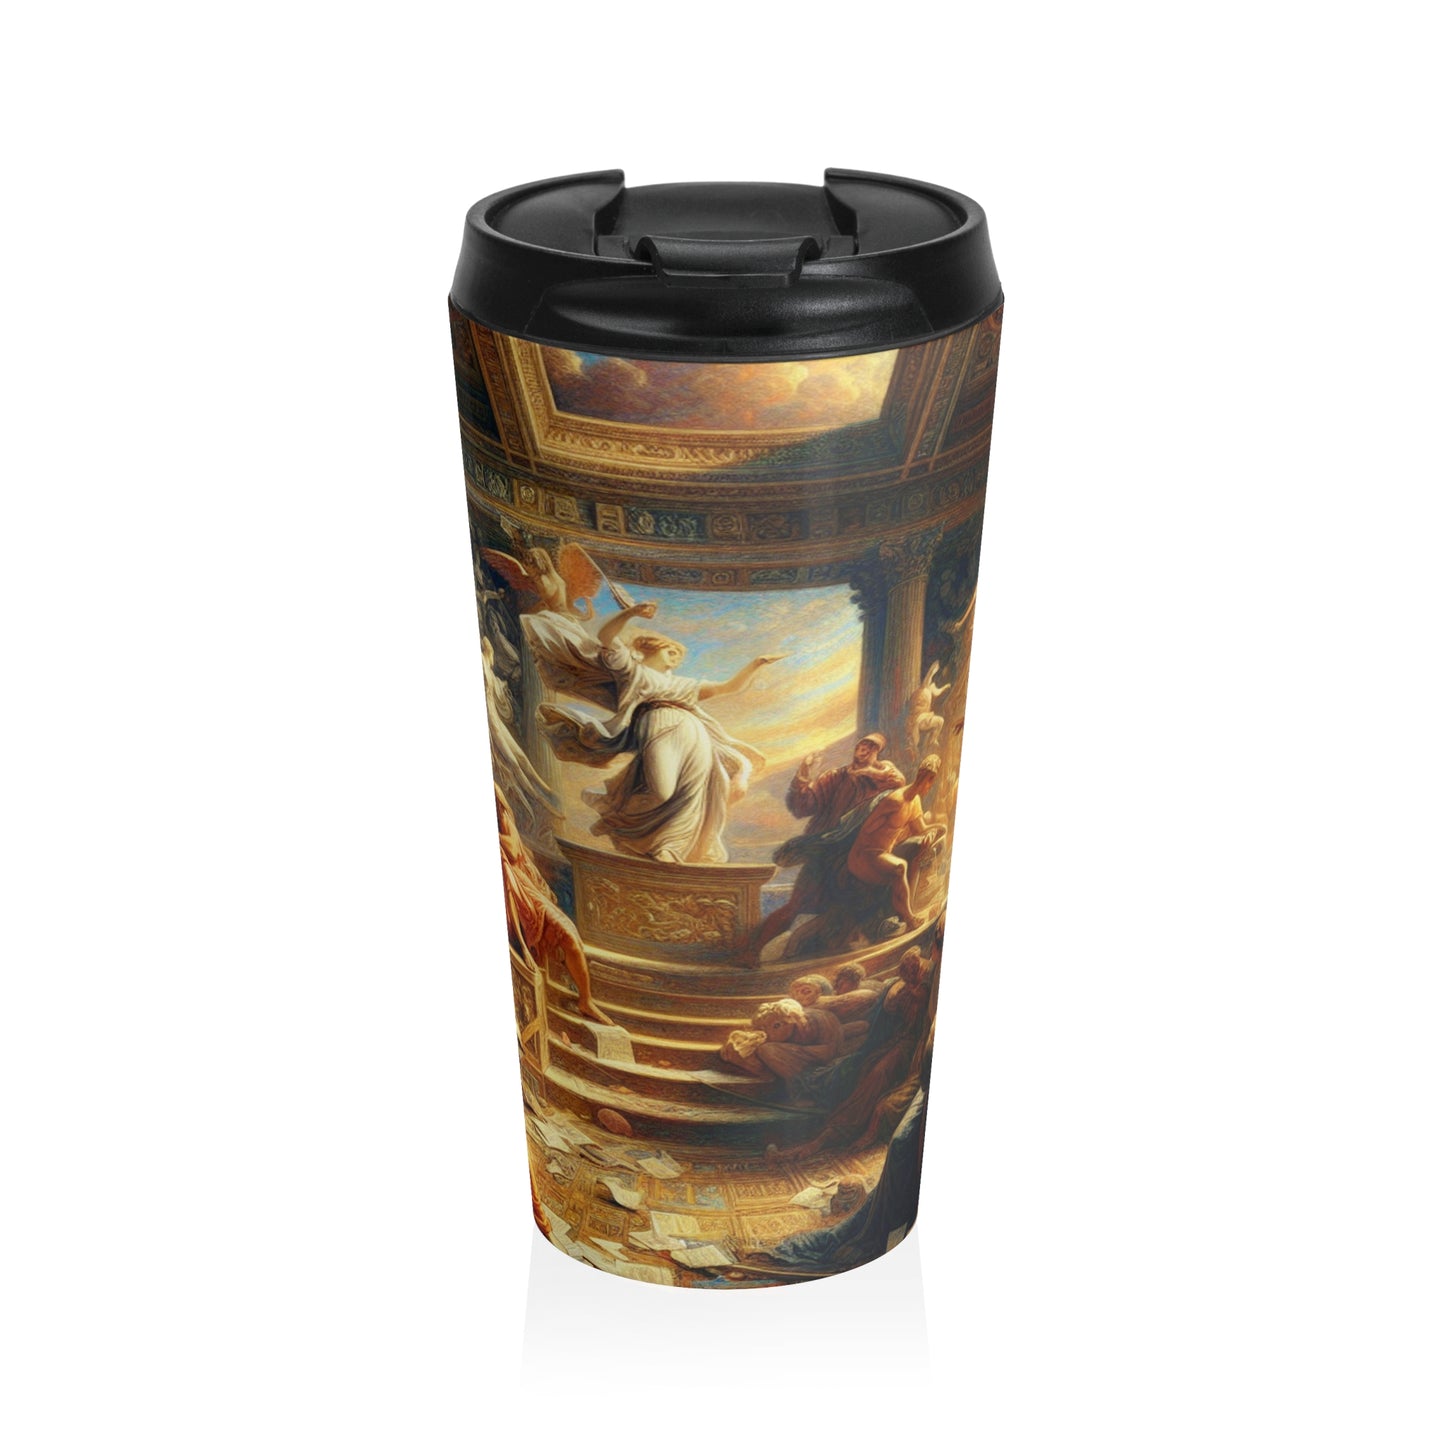 "Modern Renaissance: Leaders of Today" - The Alien Stainless Steel Travel Mug Neoclassicism